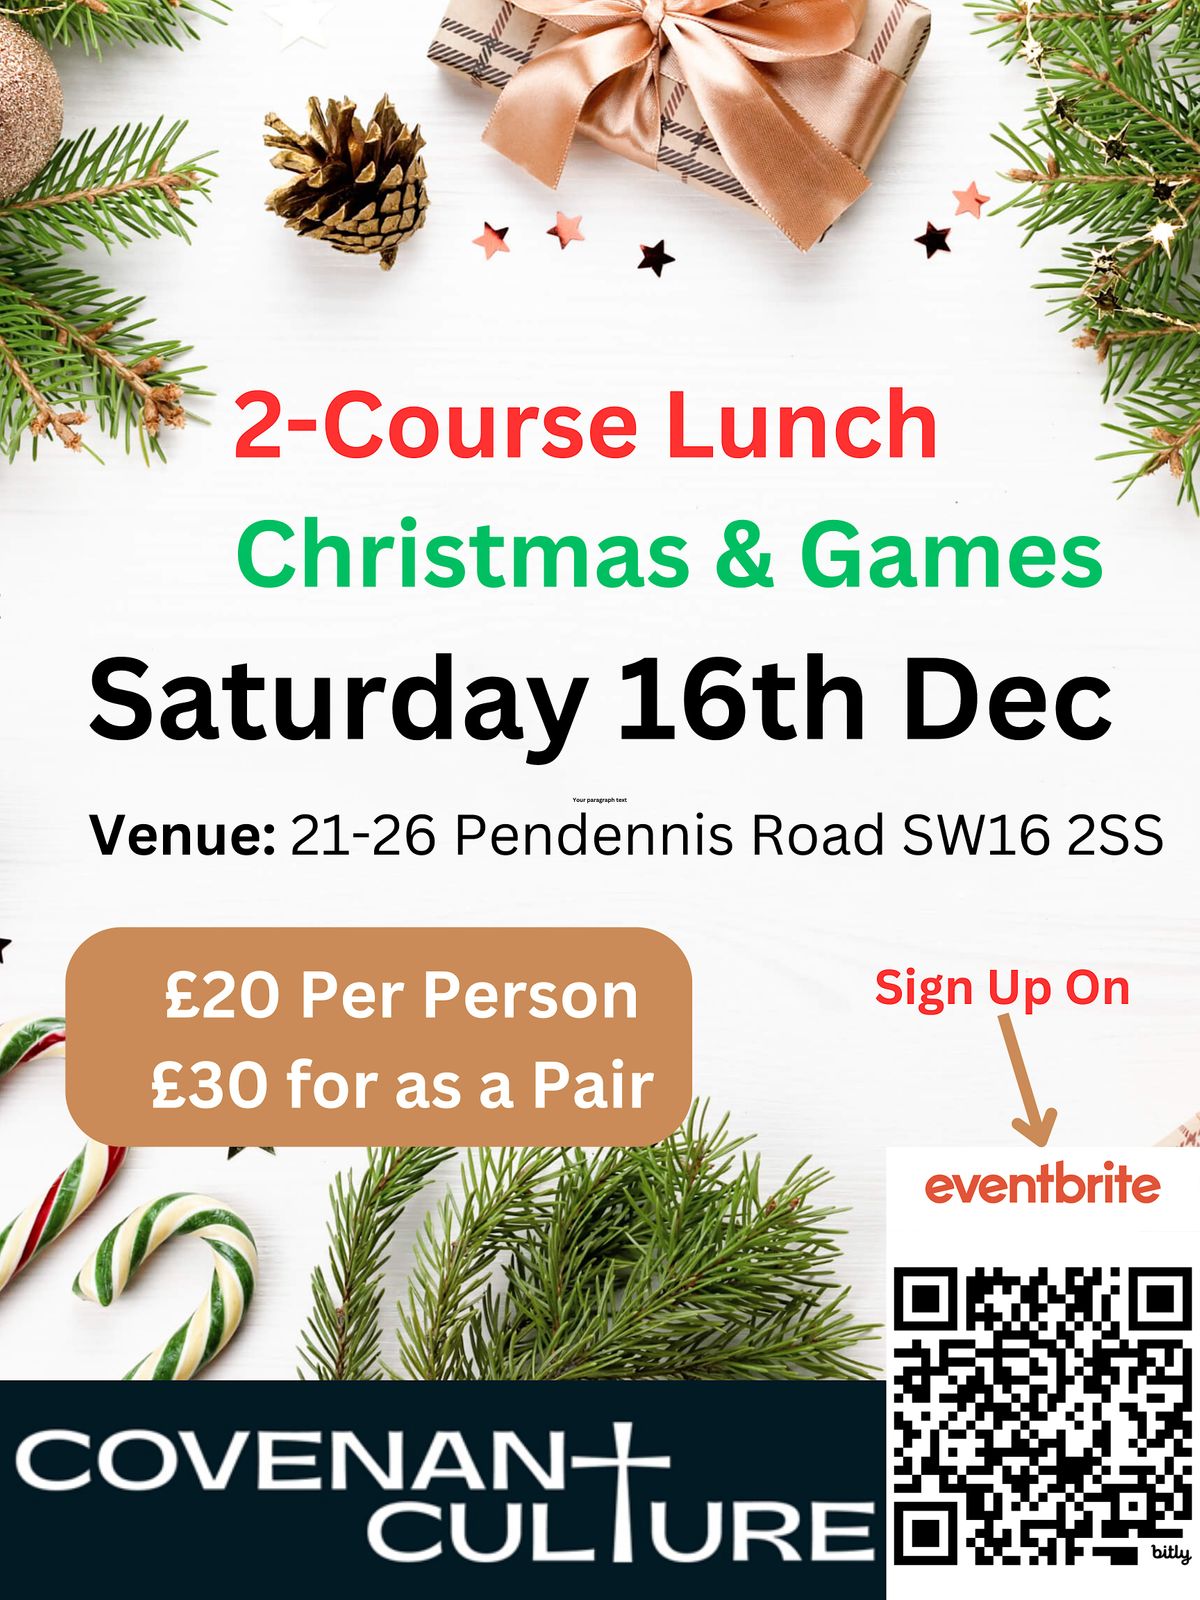 Covenant Culture Christmas Lunch + Games!